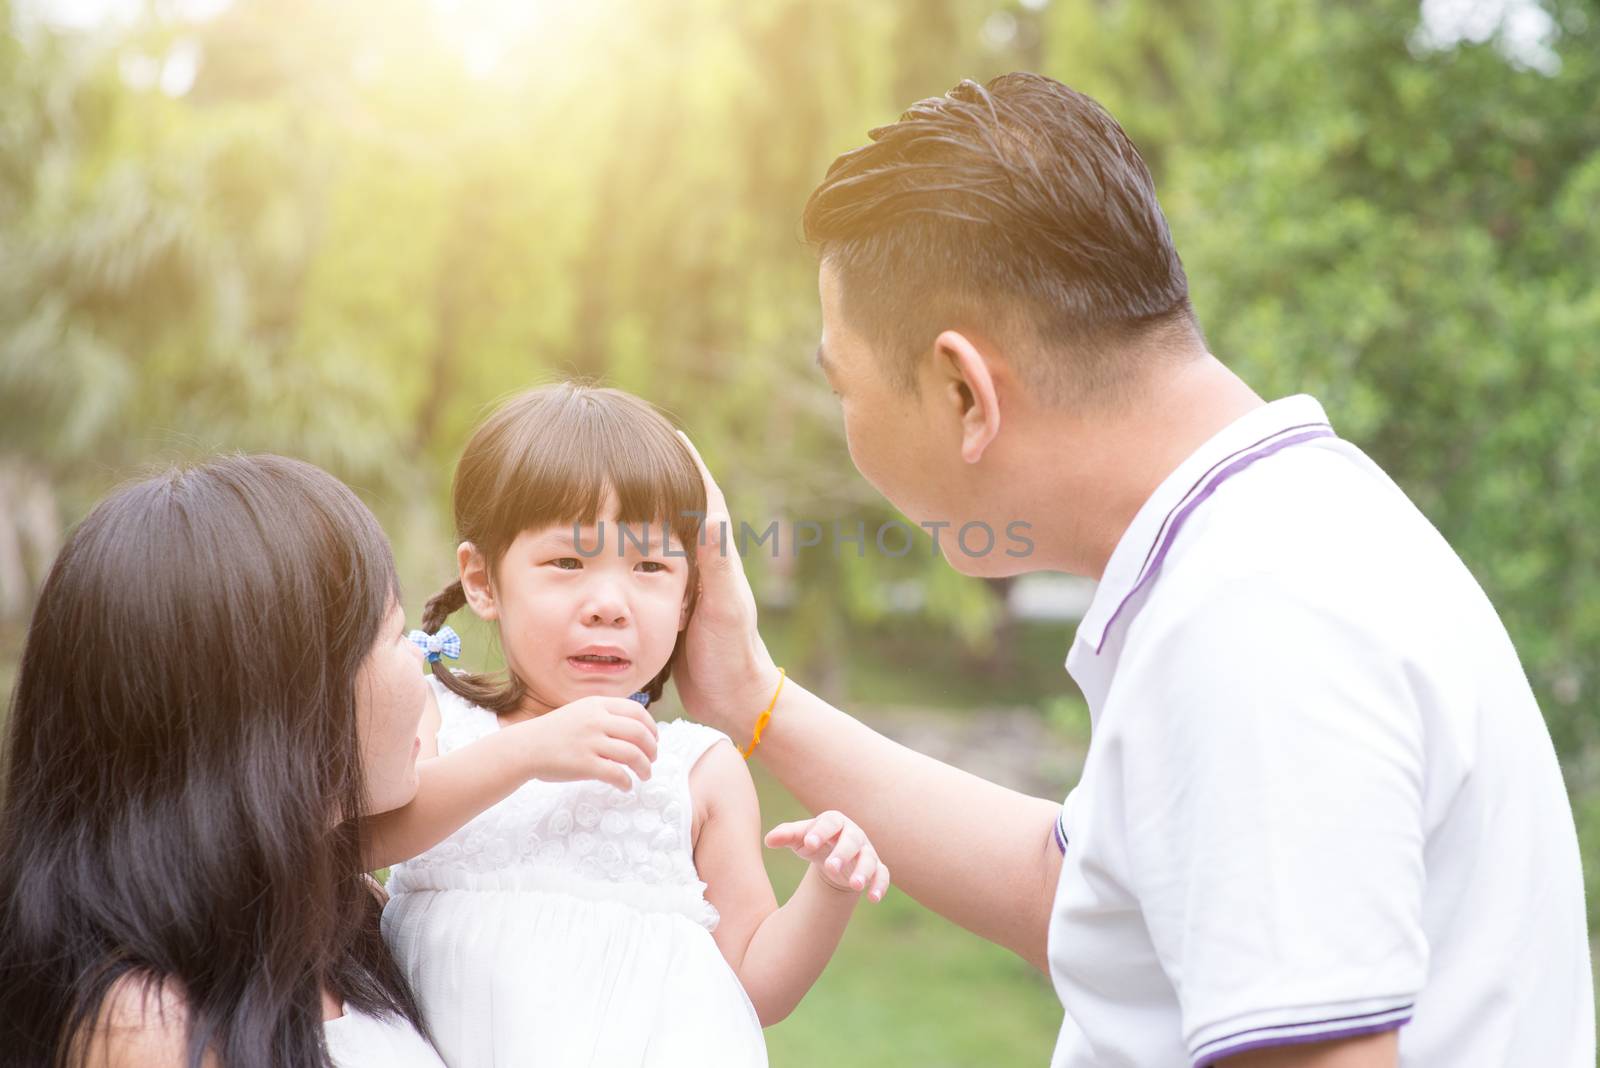 Parents comfort crying daughter at outdoor garden park. Asian family outdoors portrait.